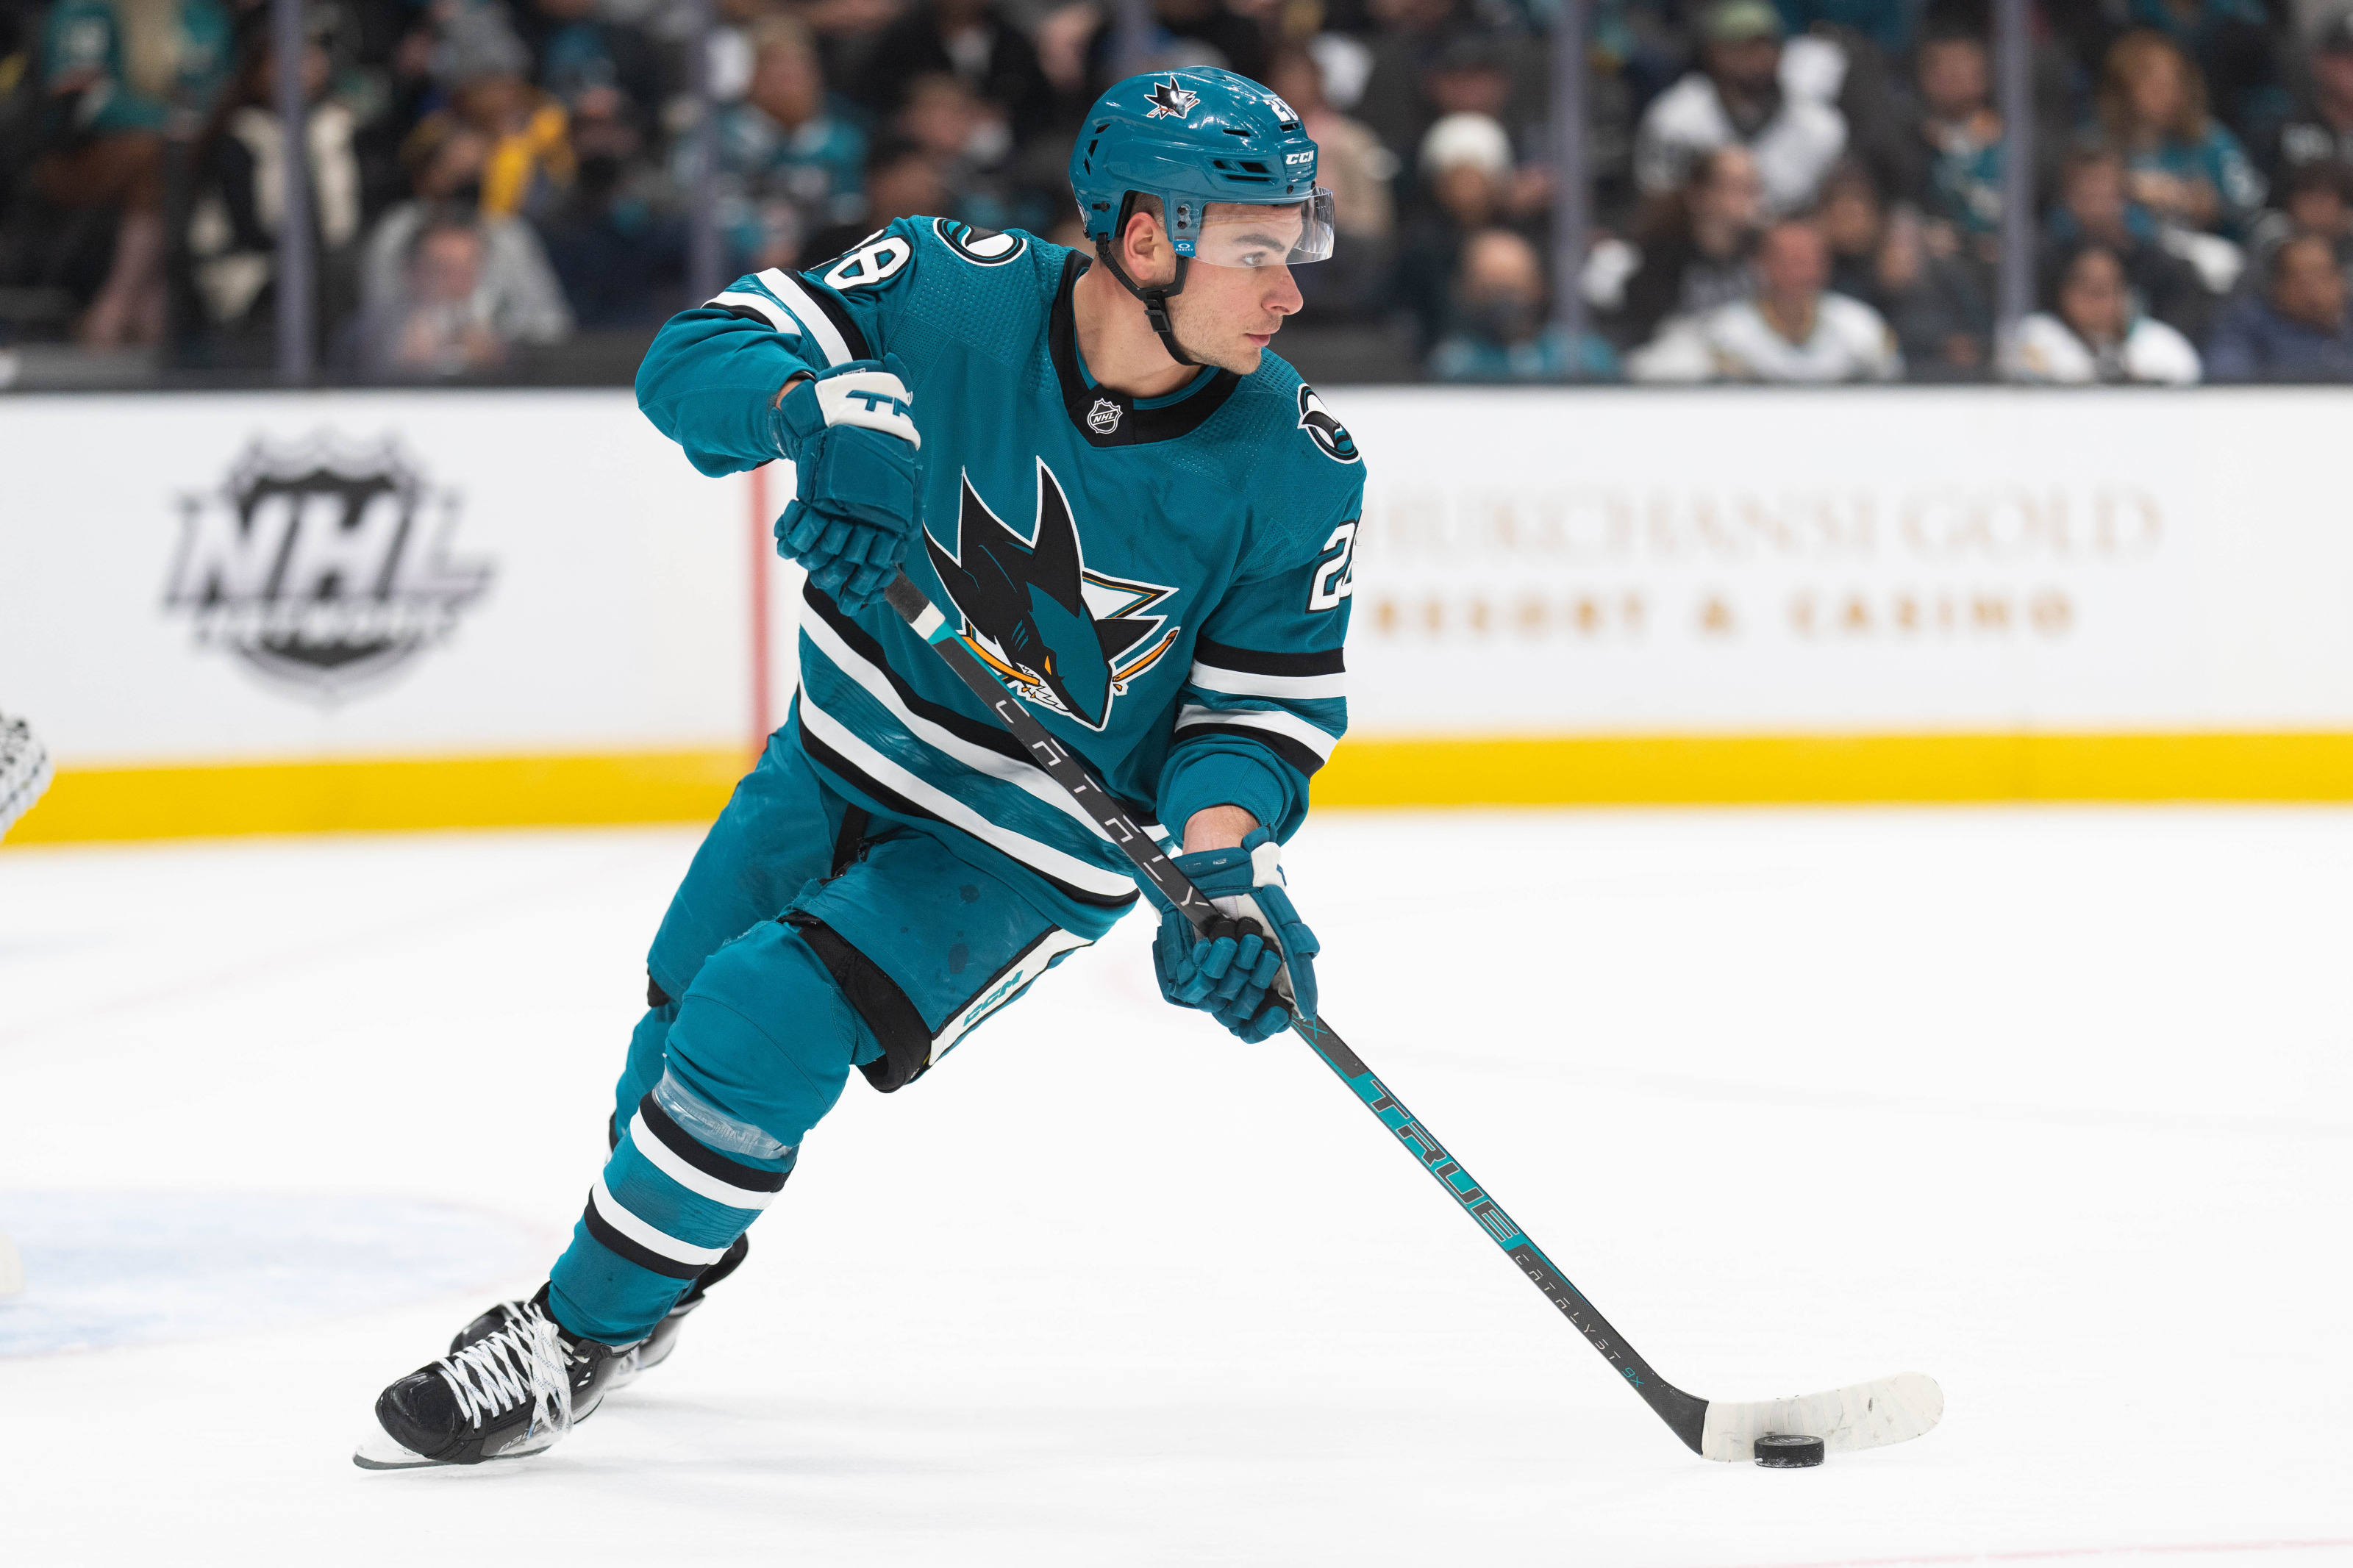 On San Jose Sharks' Loans: Timo will not play in Europe.